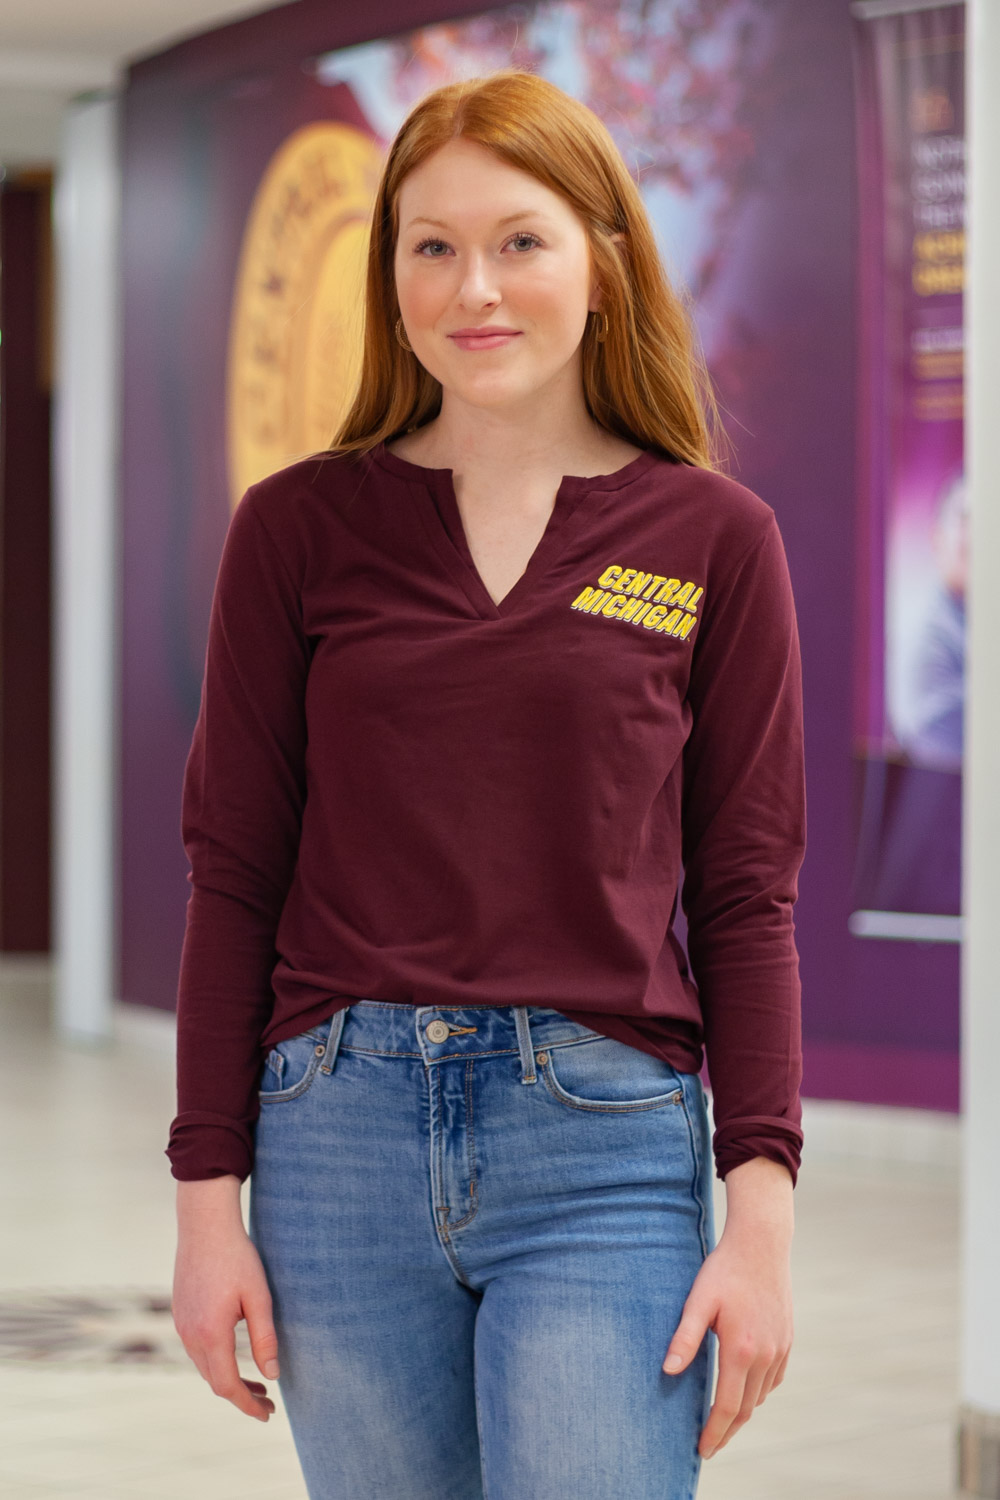 Central Michigan Maroon Avail Women's Double V-Neck Top